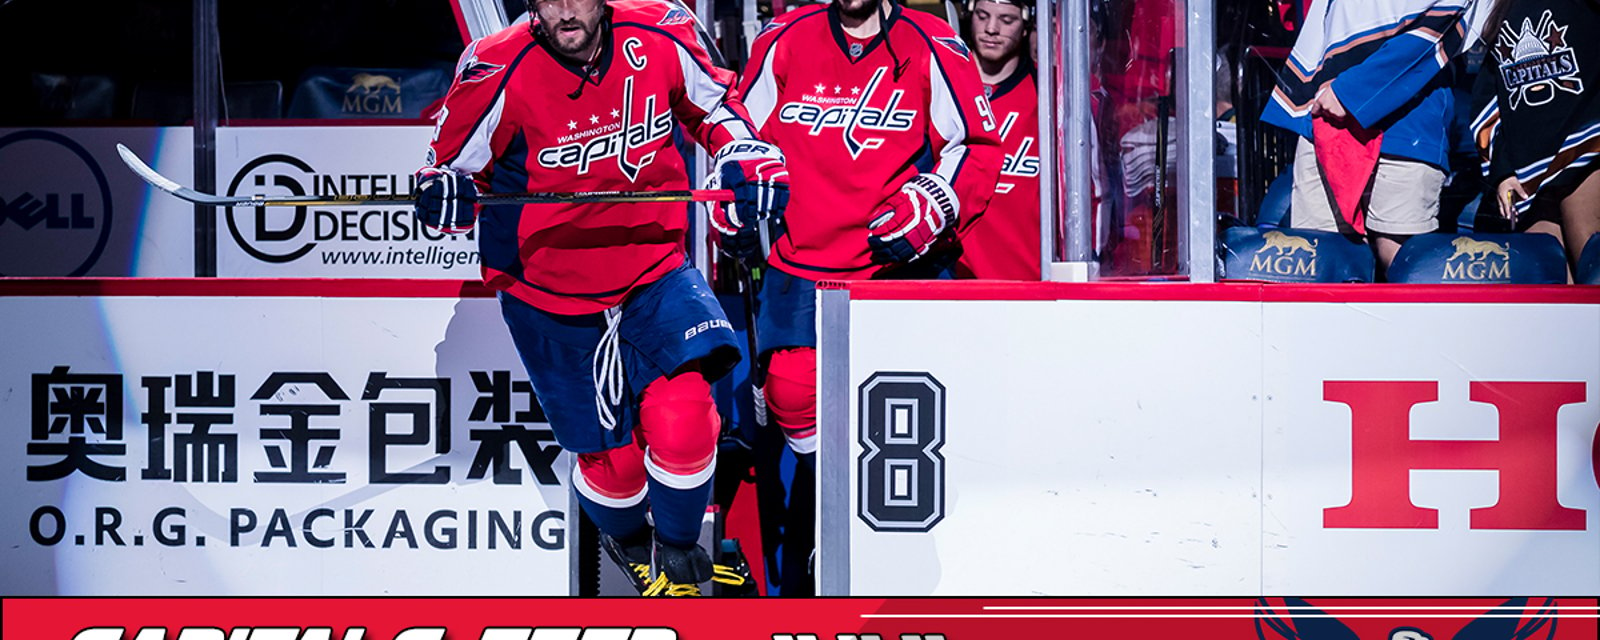 Report: What do Ovechkin’s teammates really think about his leadership?